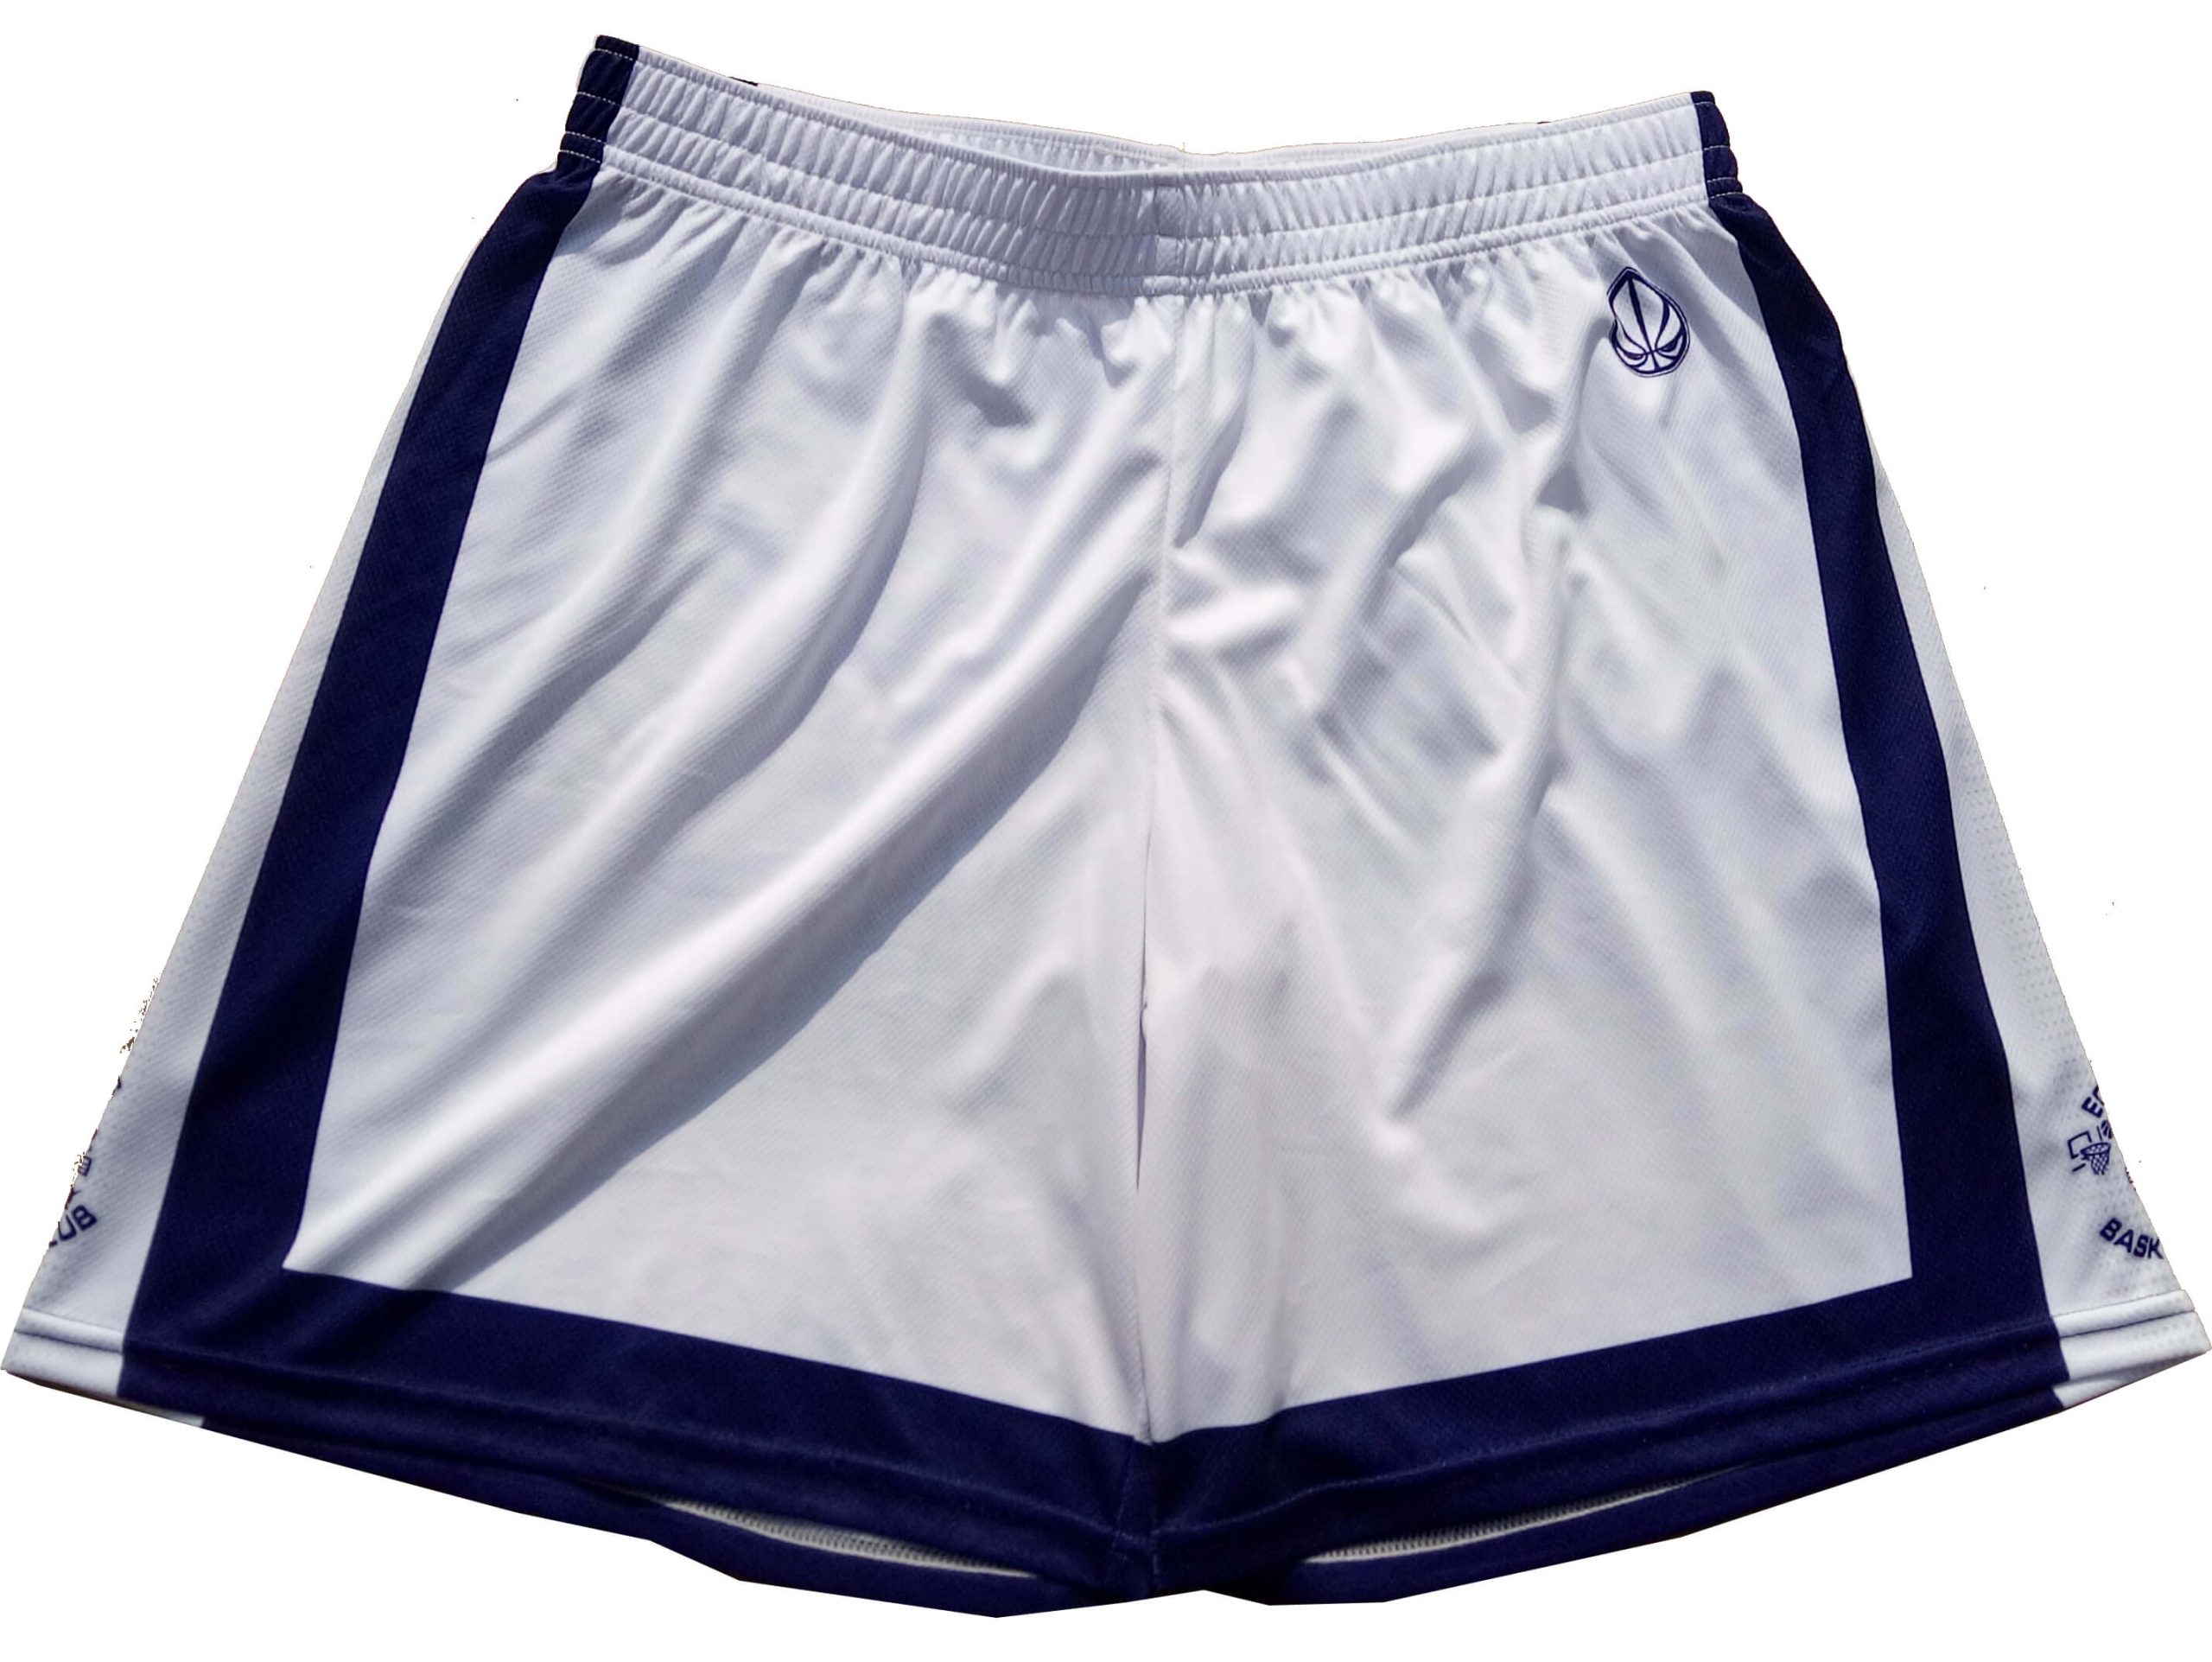 white basketball shorts-front (2) - Casual Clothing for Men, Women ...